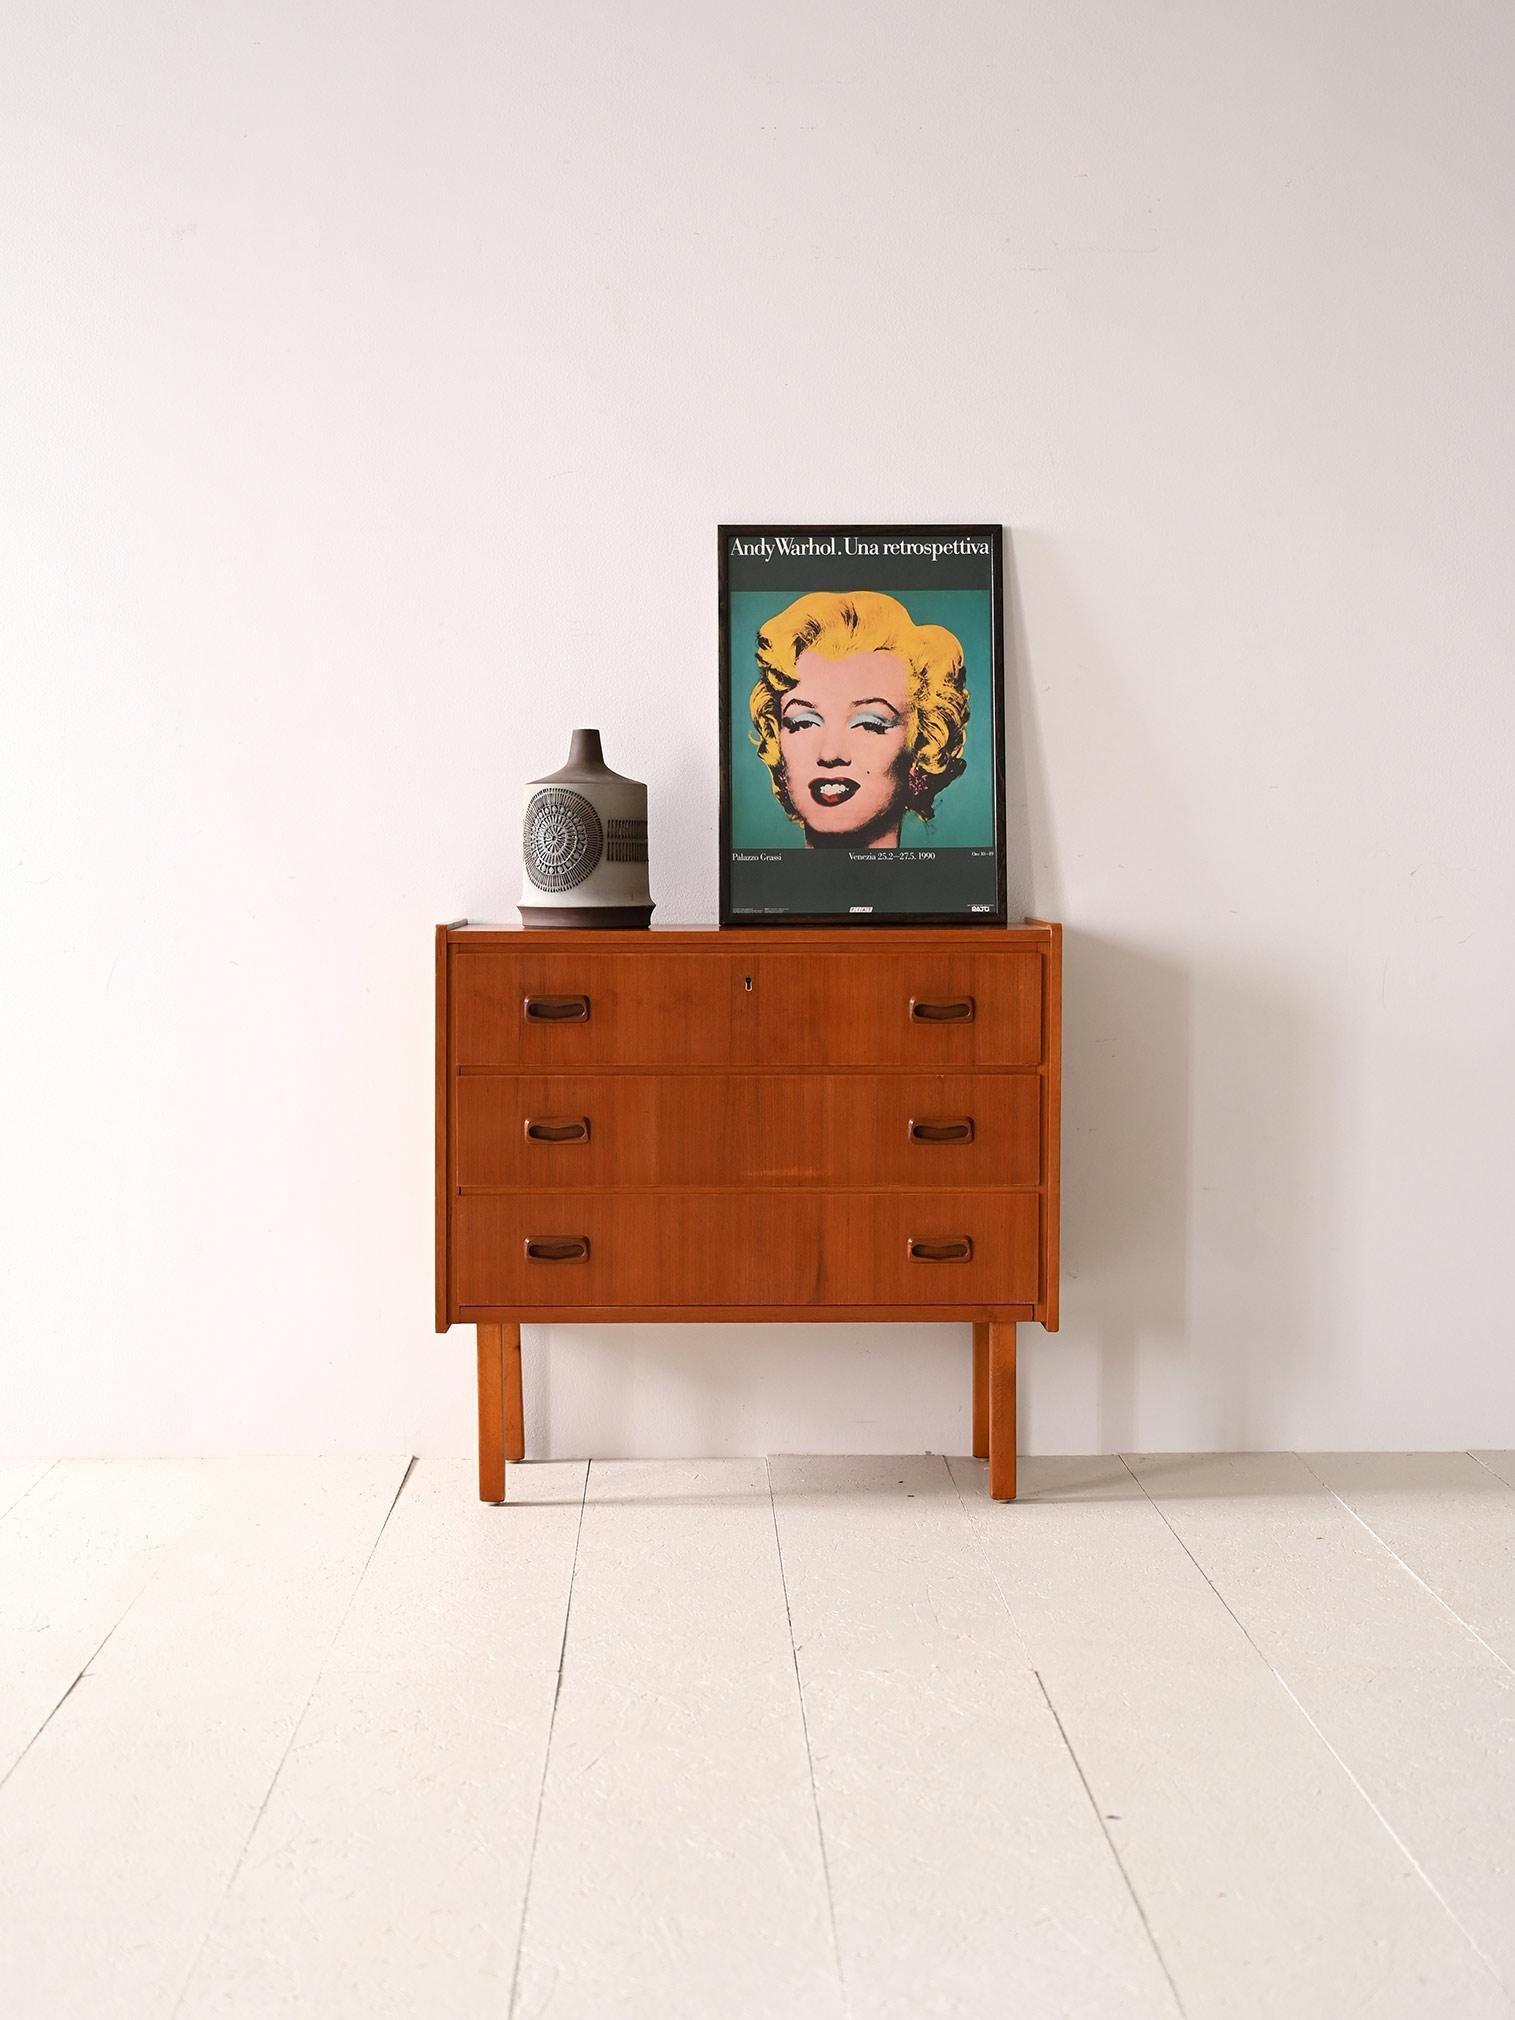 Vintage teak chest of drawers from the 1960s.
This Scandinavian design piece with clean and simple lines features three spacious drawers, perfect for storing everyday items such as linens, accessories or clothes. The first drawer also features a